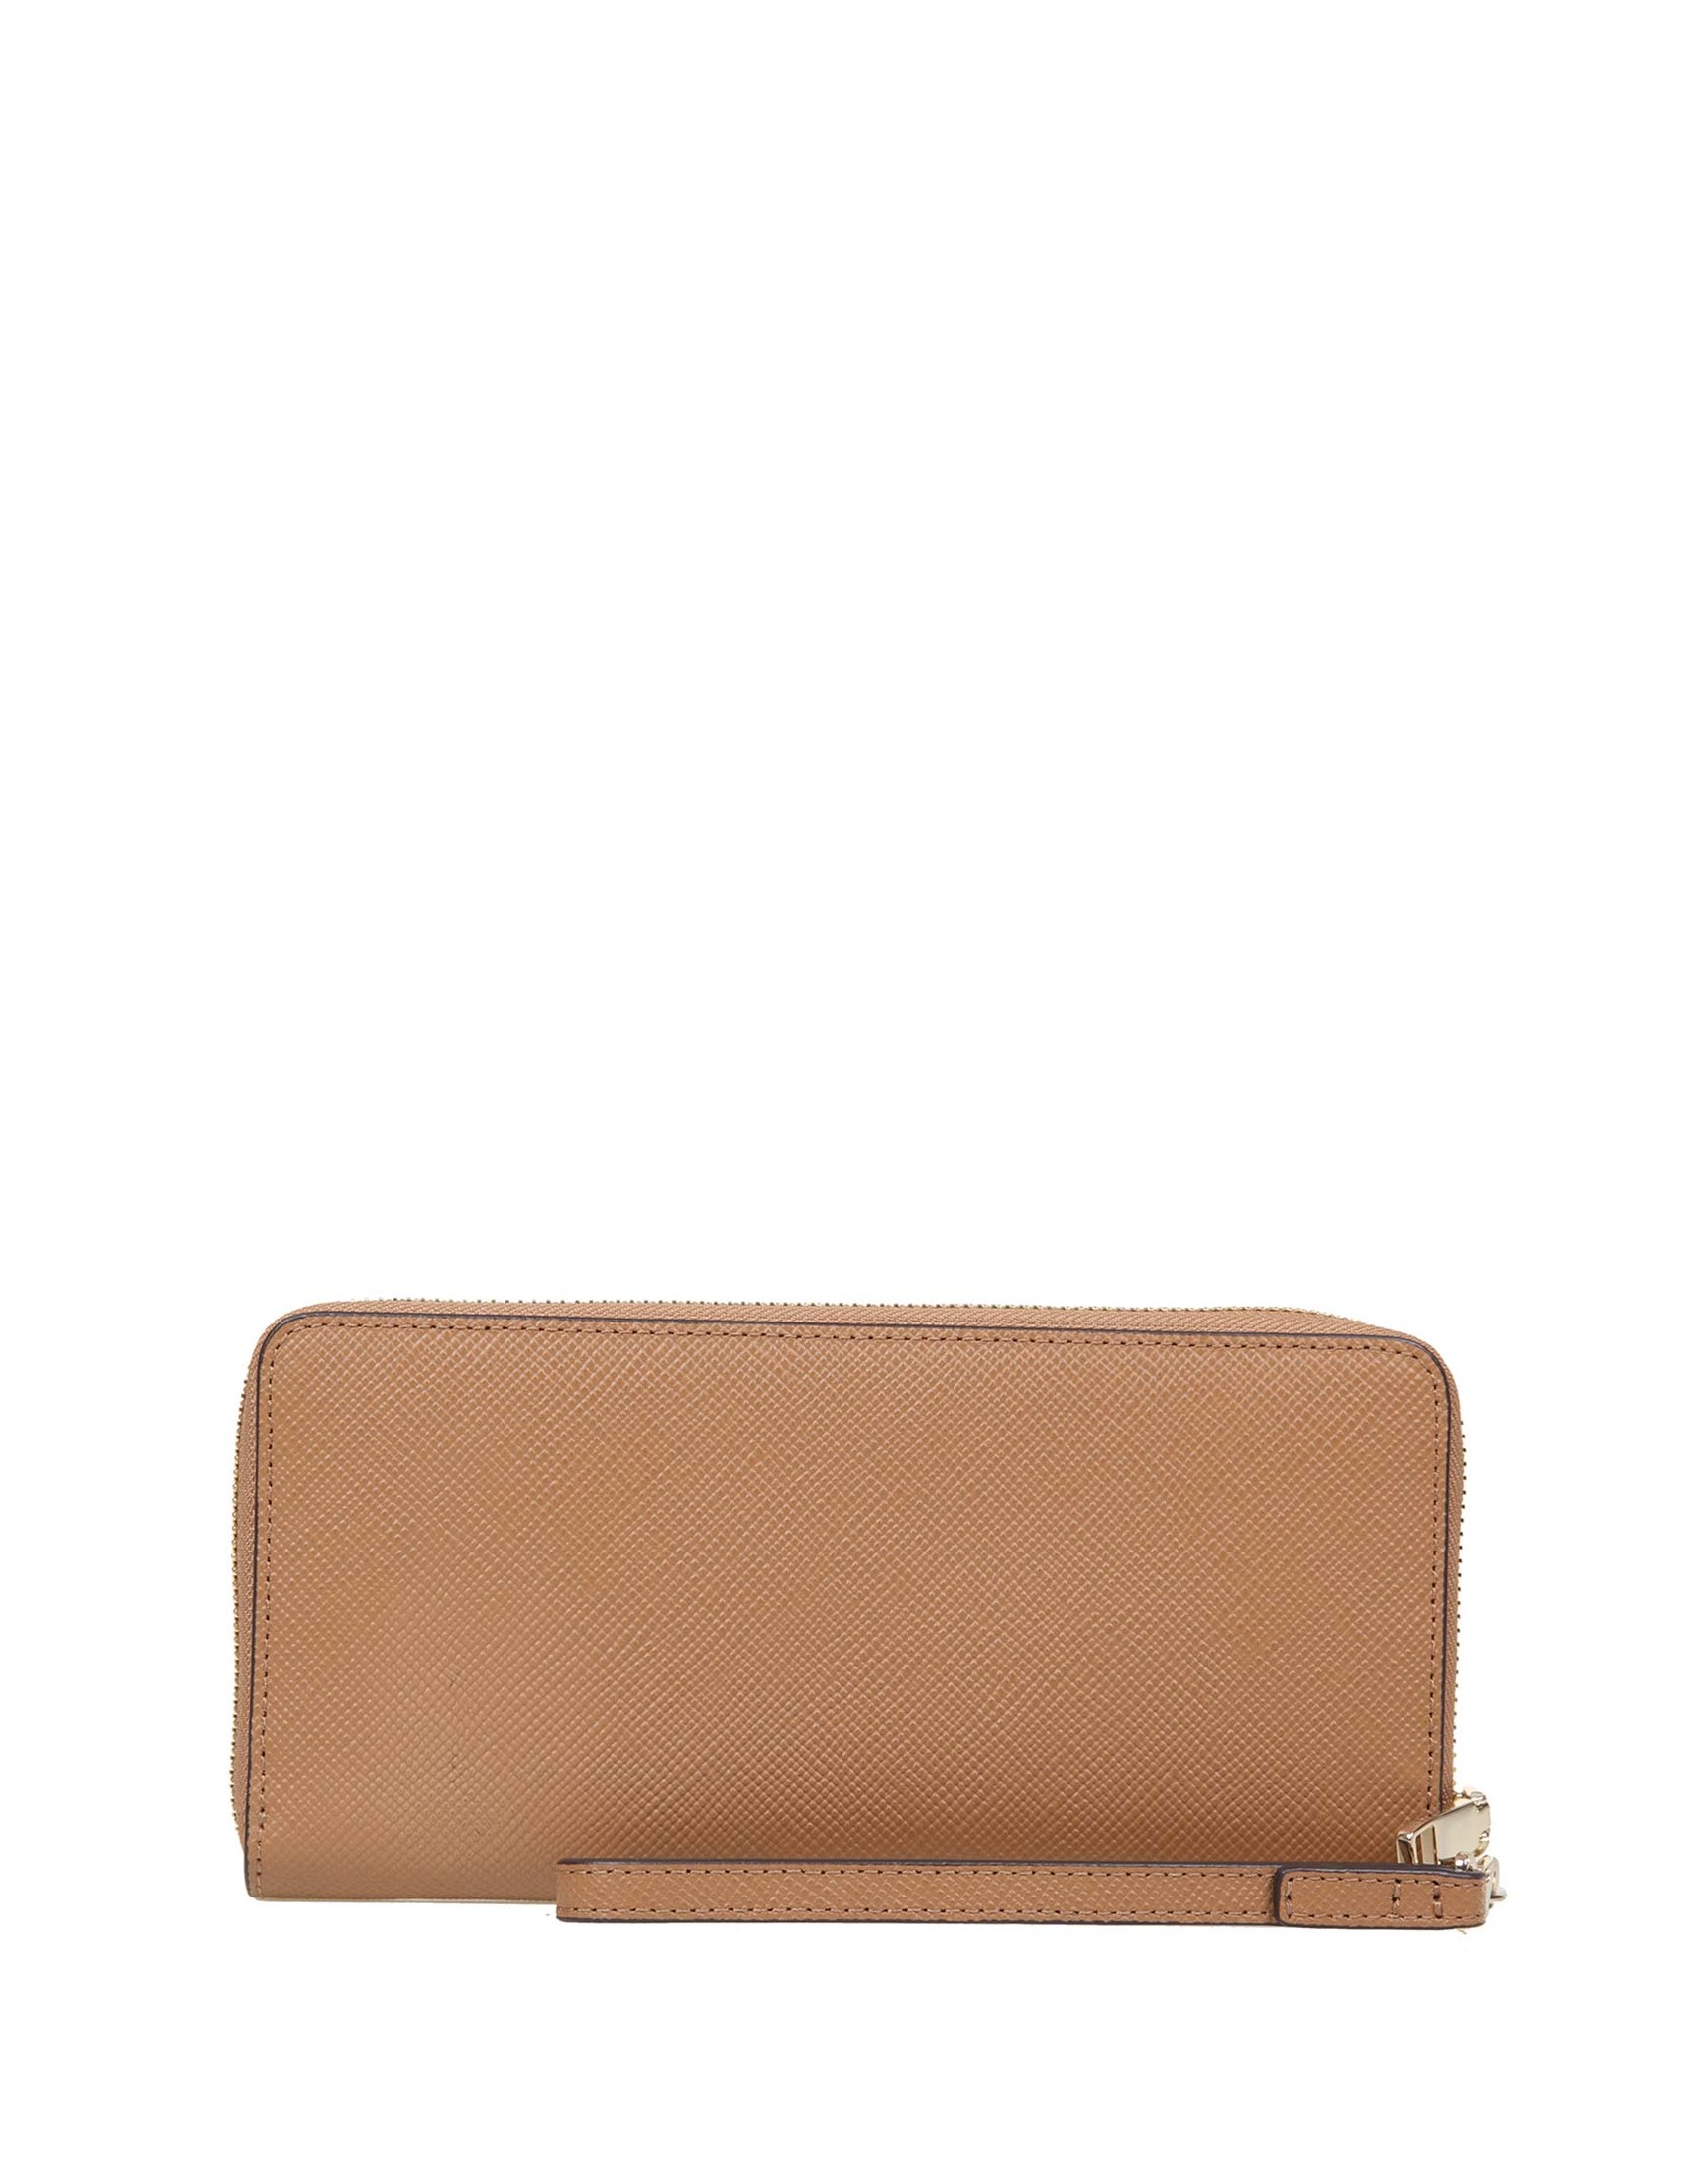 TORY BURCH PERRY ZIP WALLET IN LEATHER COLOR LEATHER